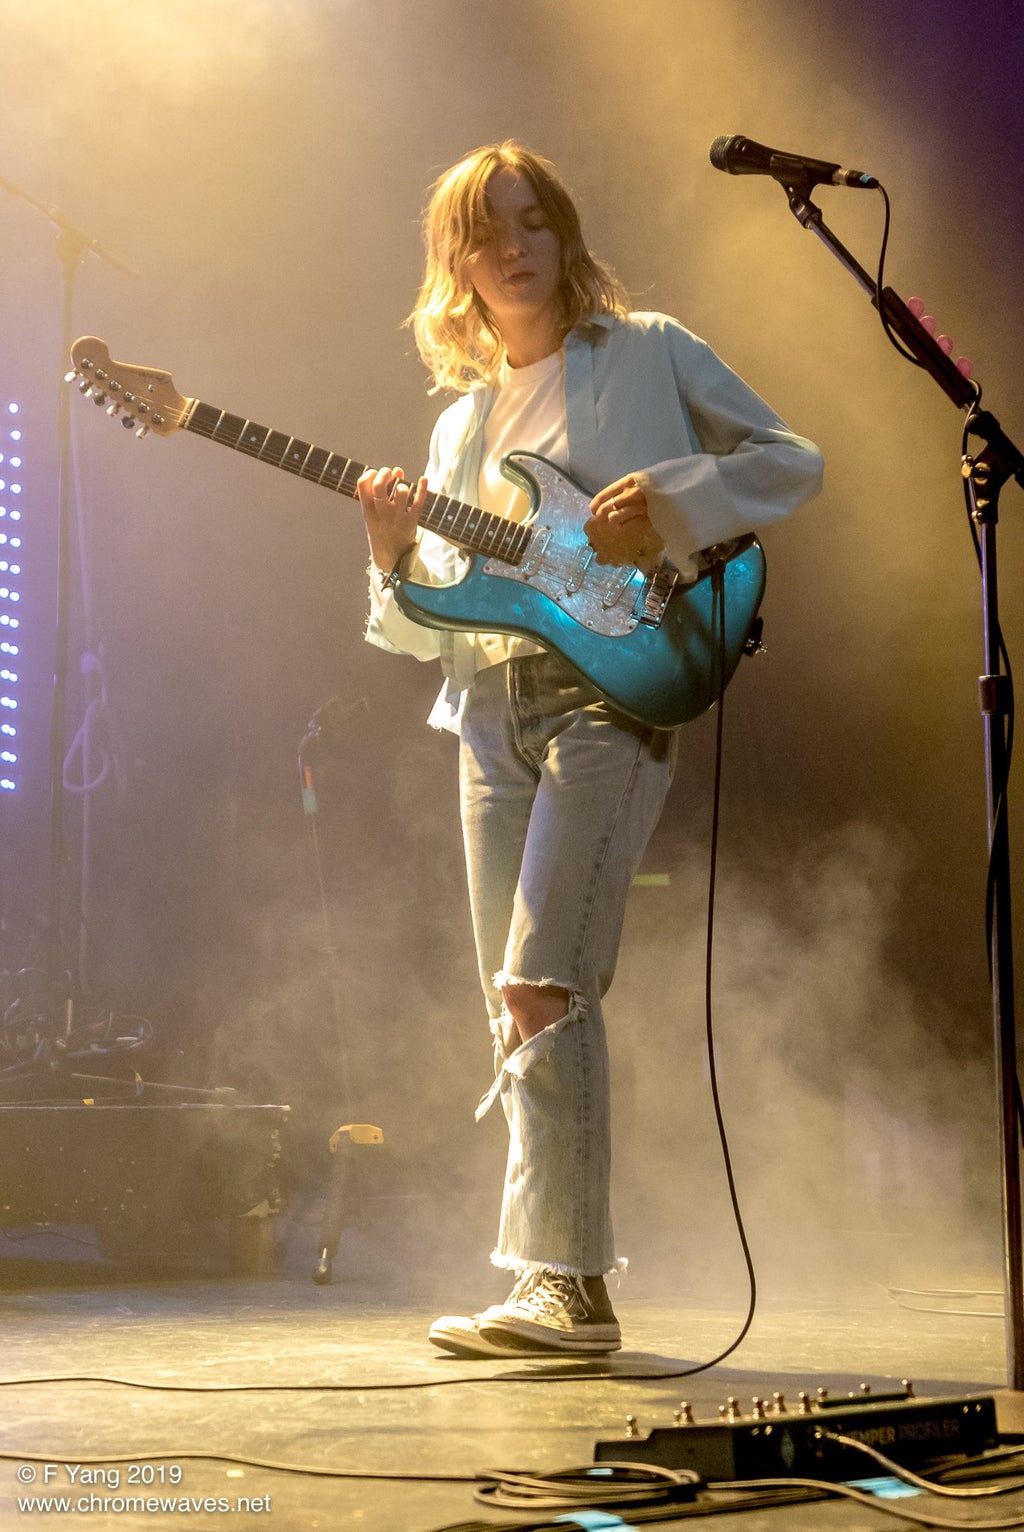 the Japanese house performing